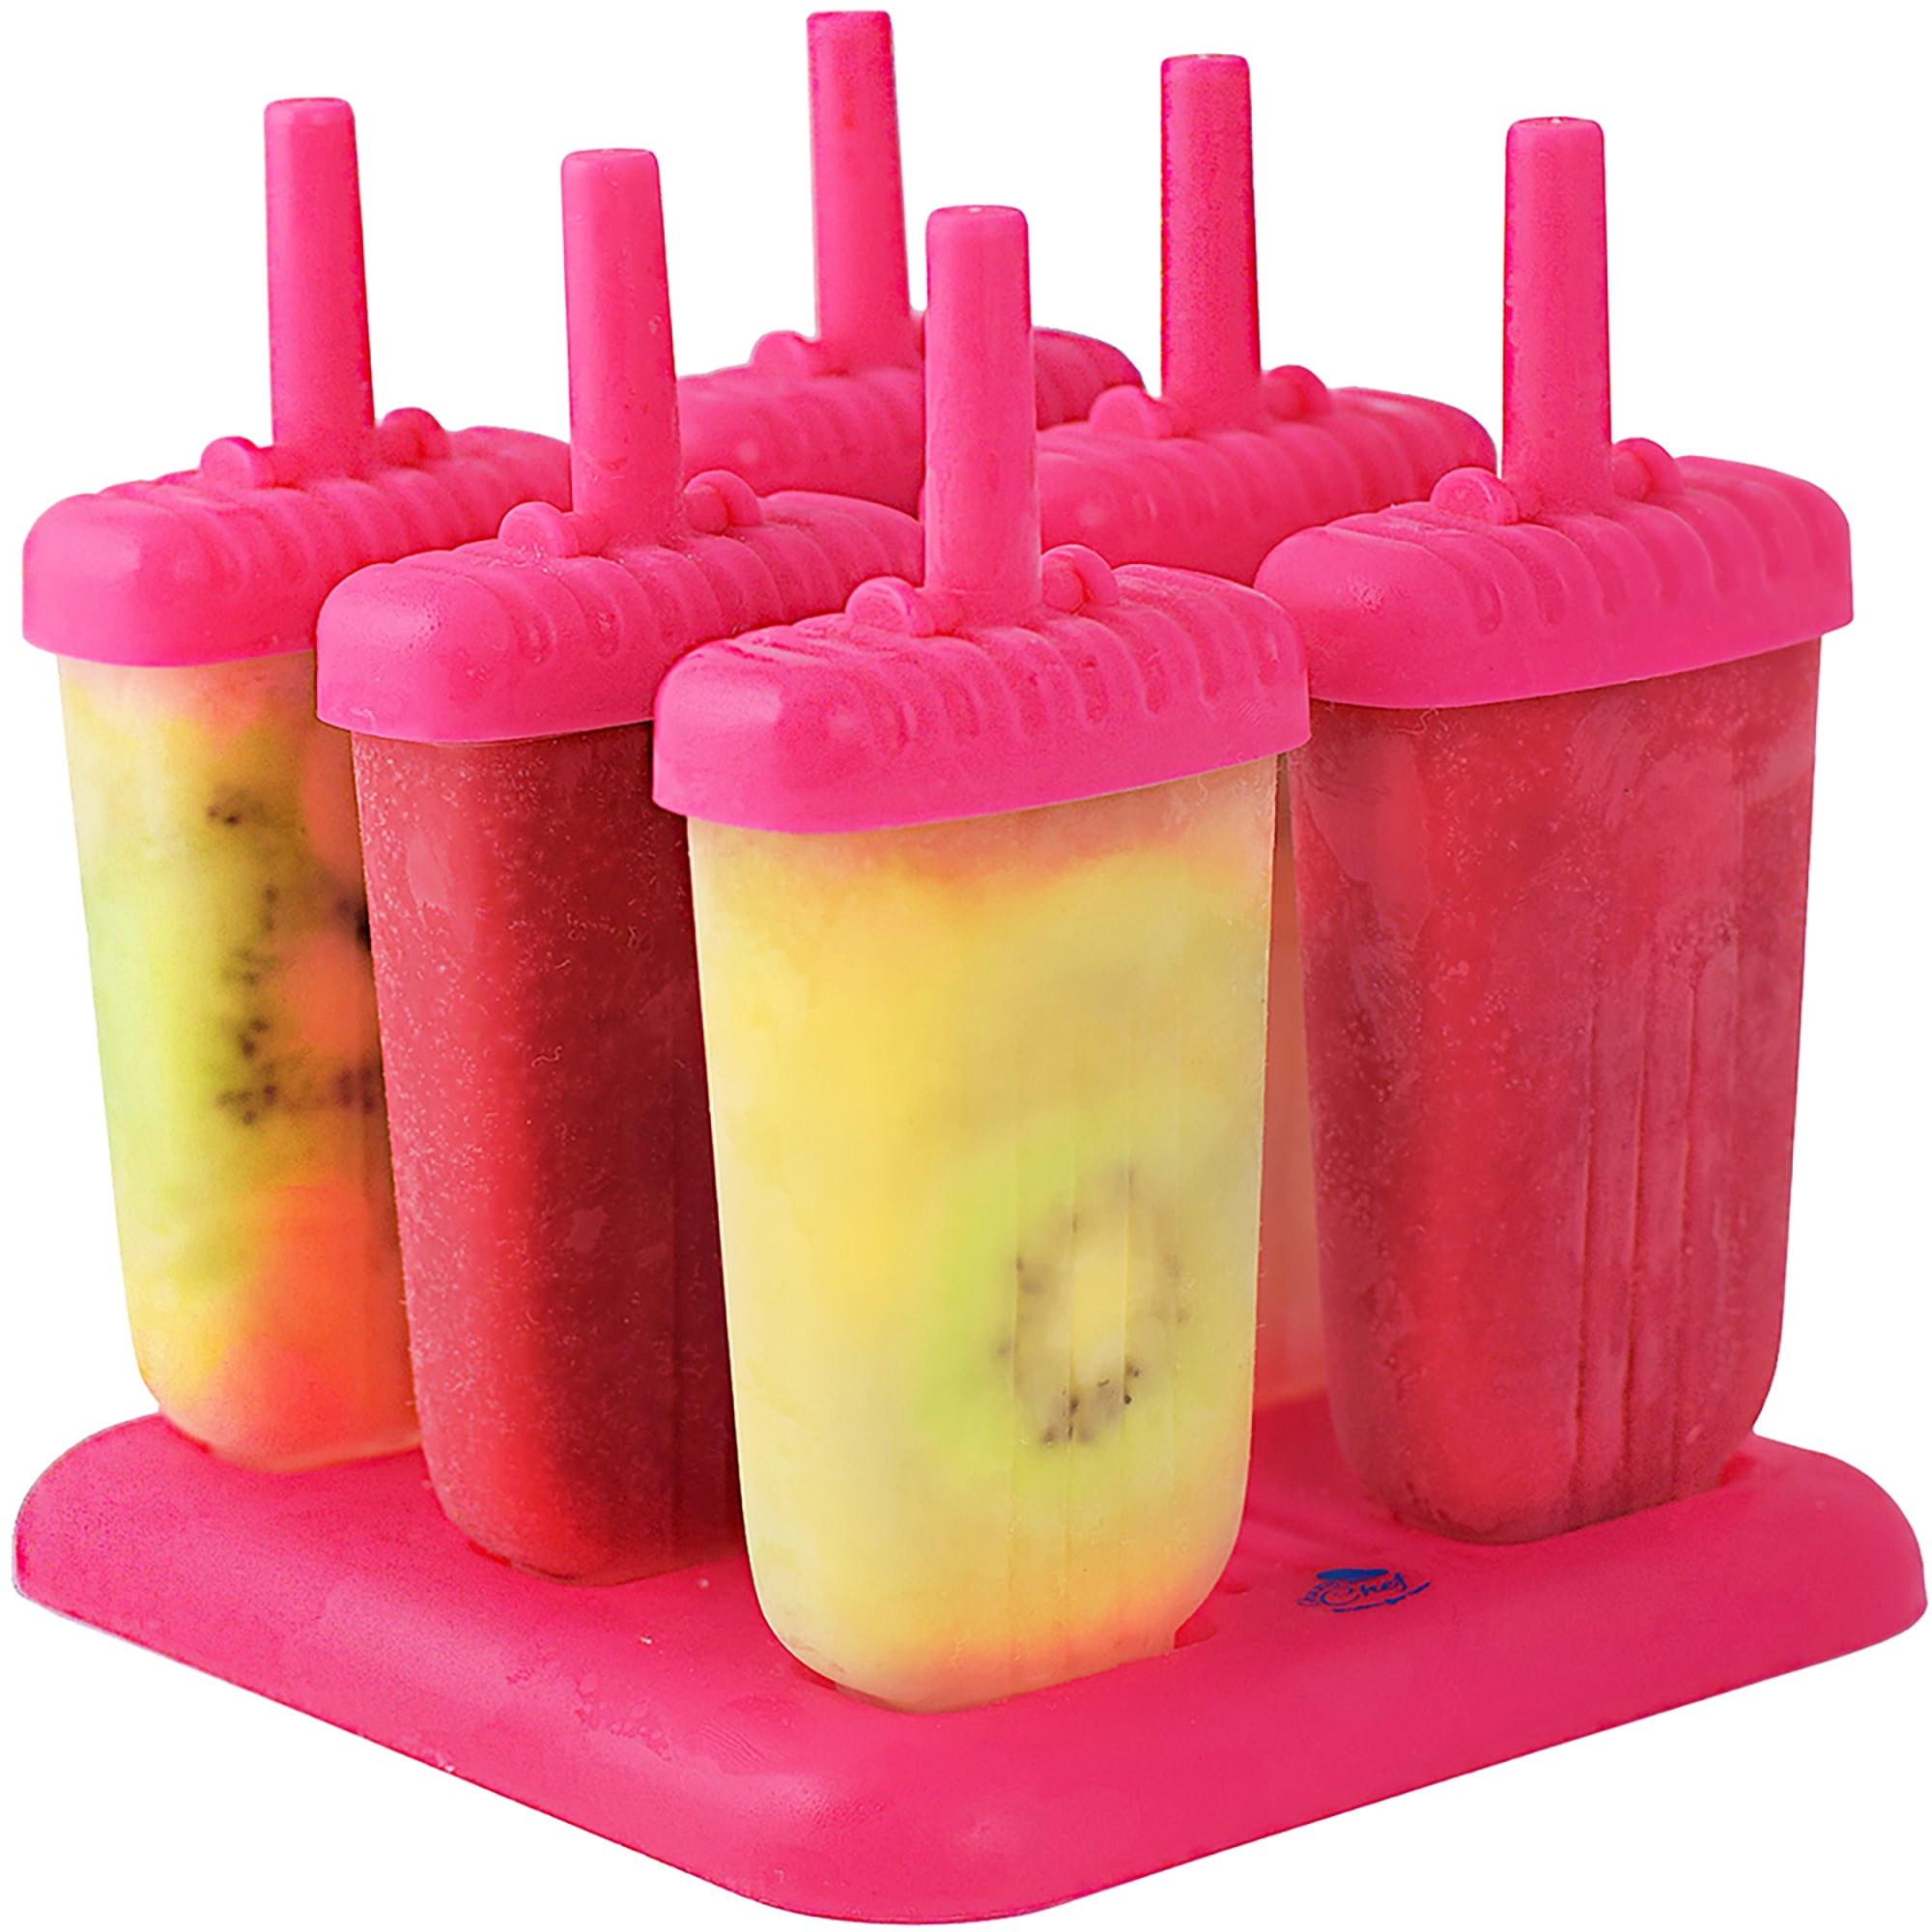 KONUNUS Ice Lolly Moulds Reusable Popsicle Molds Ice Cream Mold Maker Set of 6 with Sticks and Cleaning Brush 